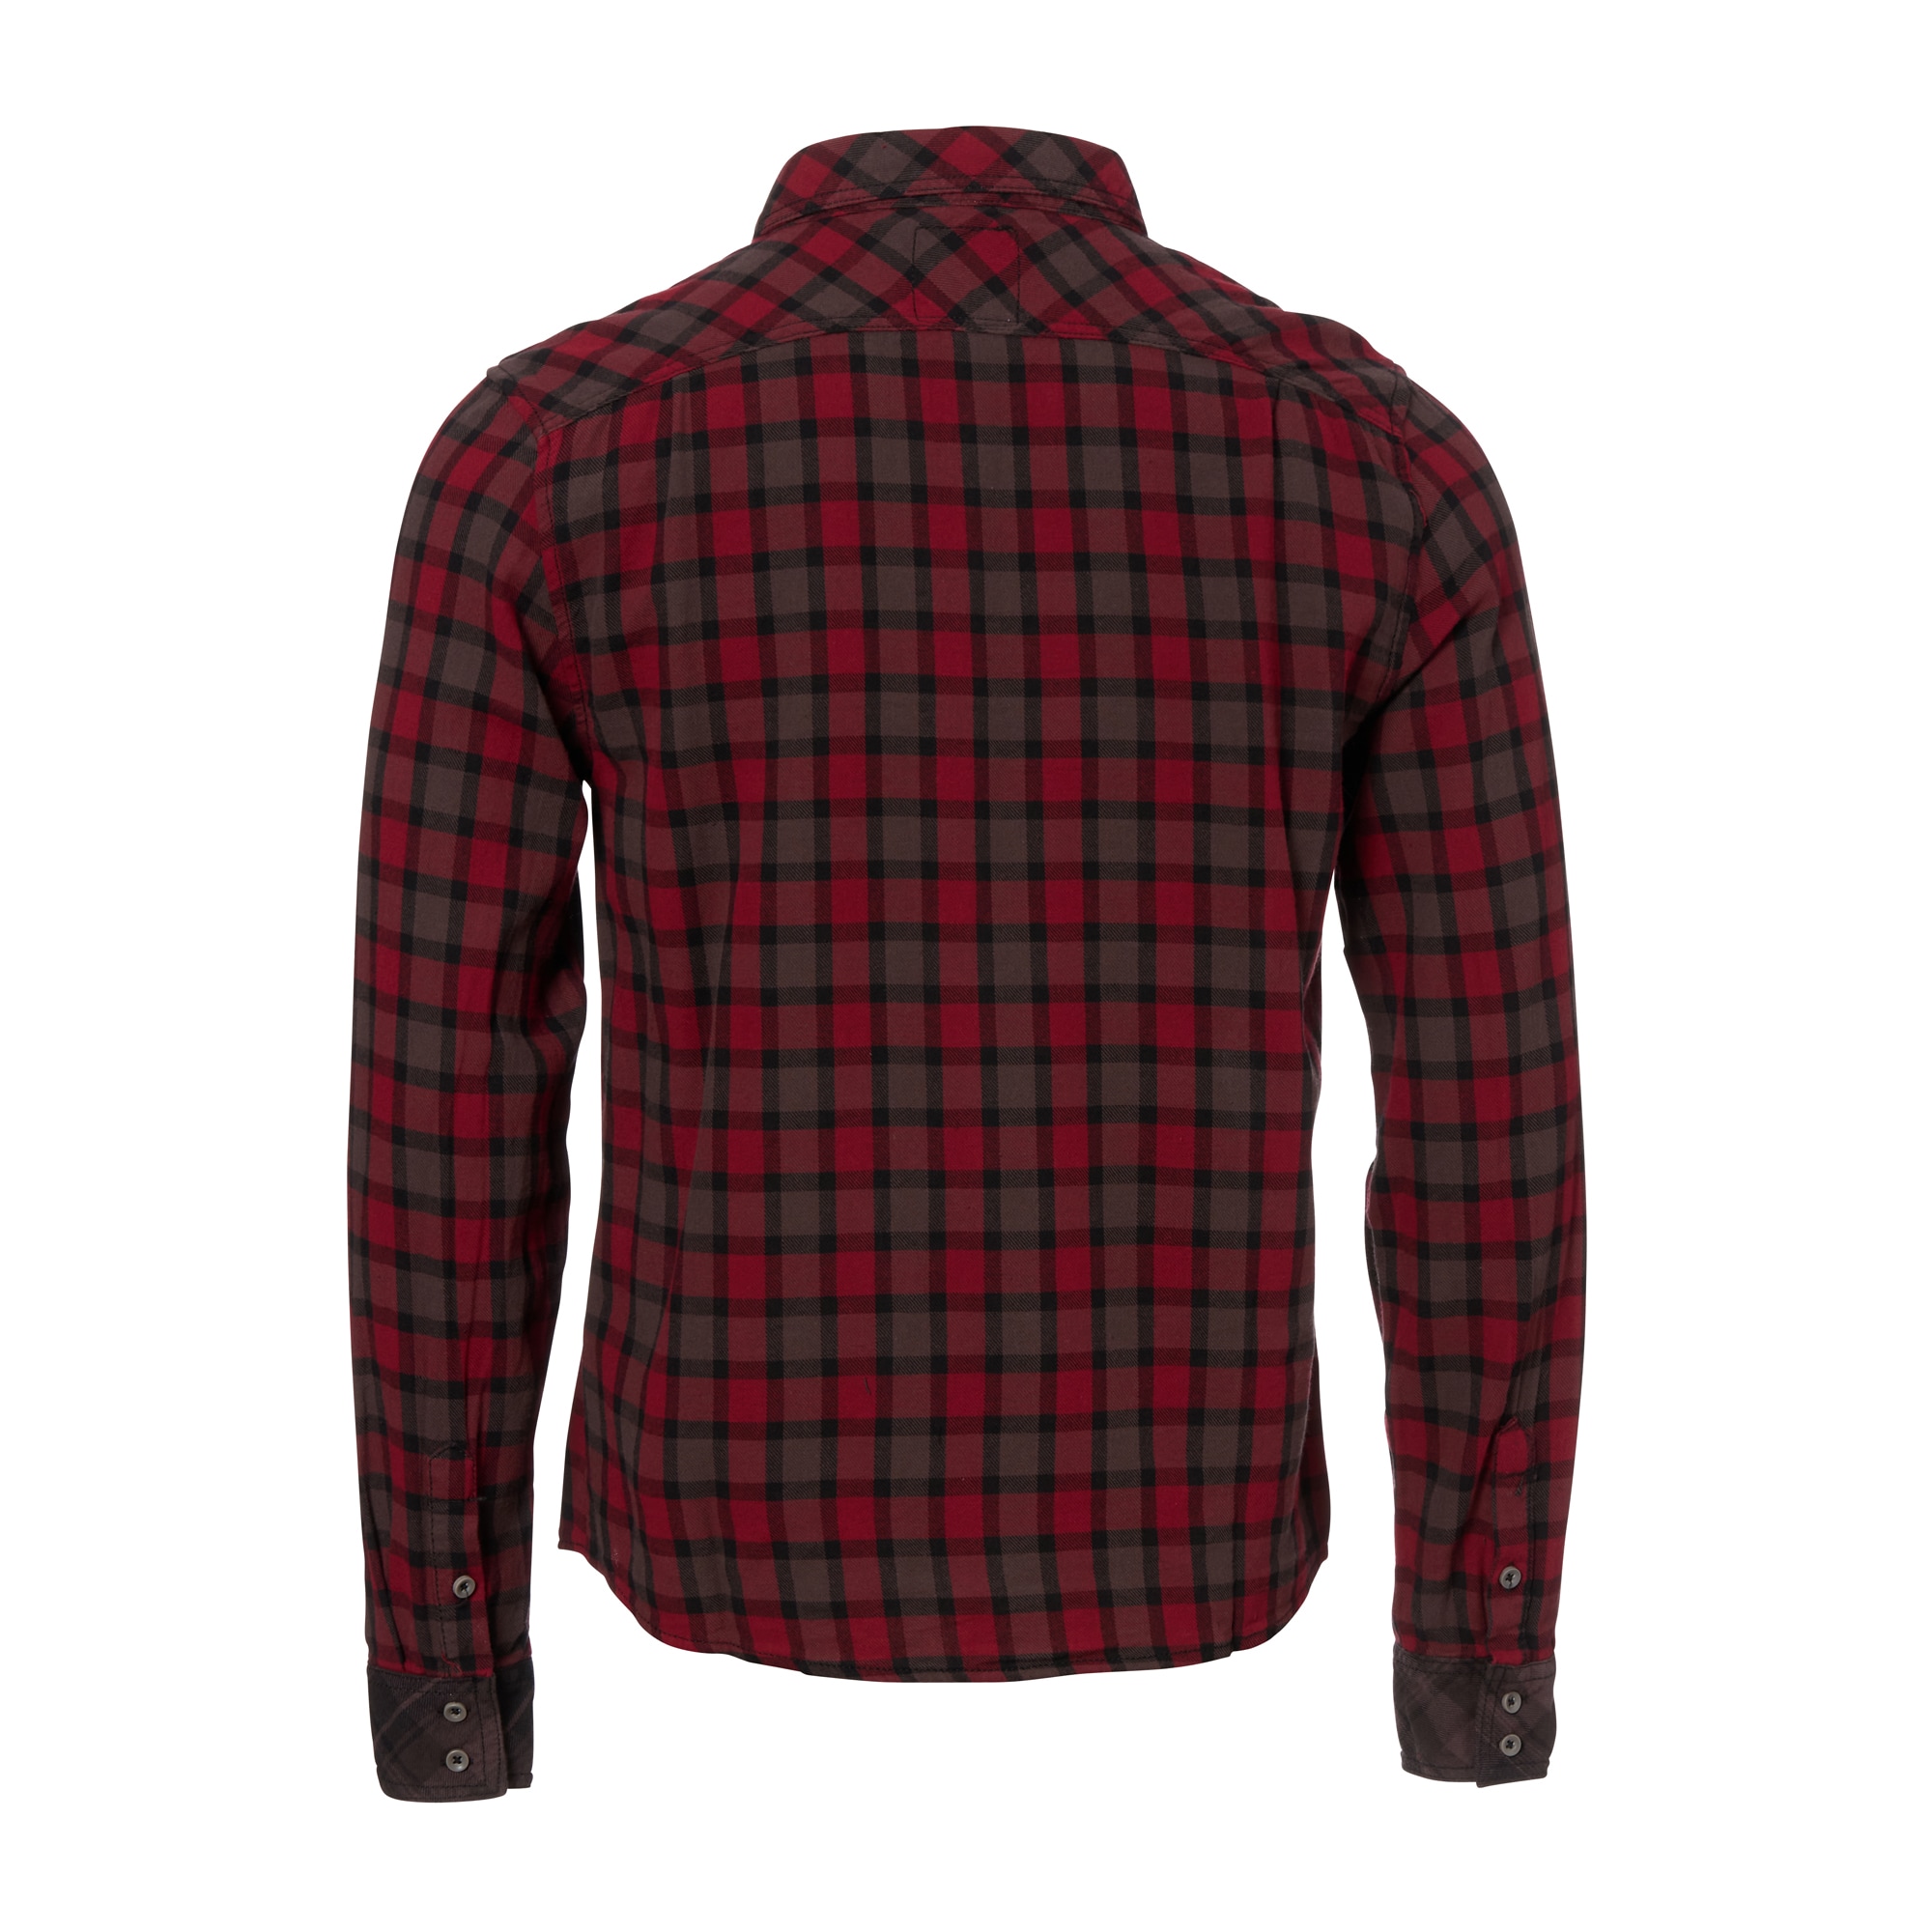 Purchase the Brandit Duncan Shirt Check red/brown by ASMC